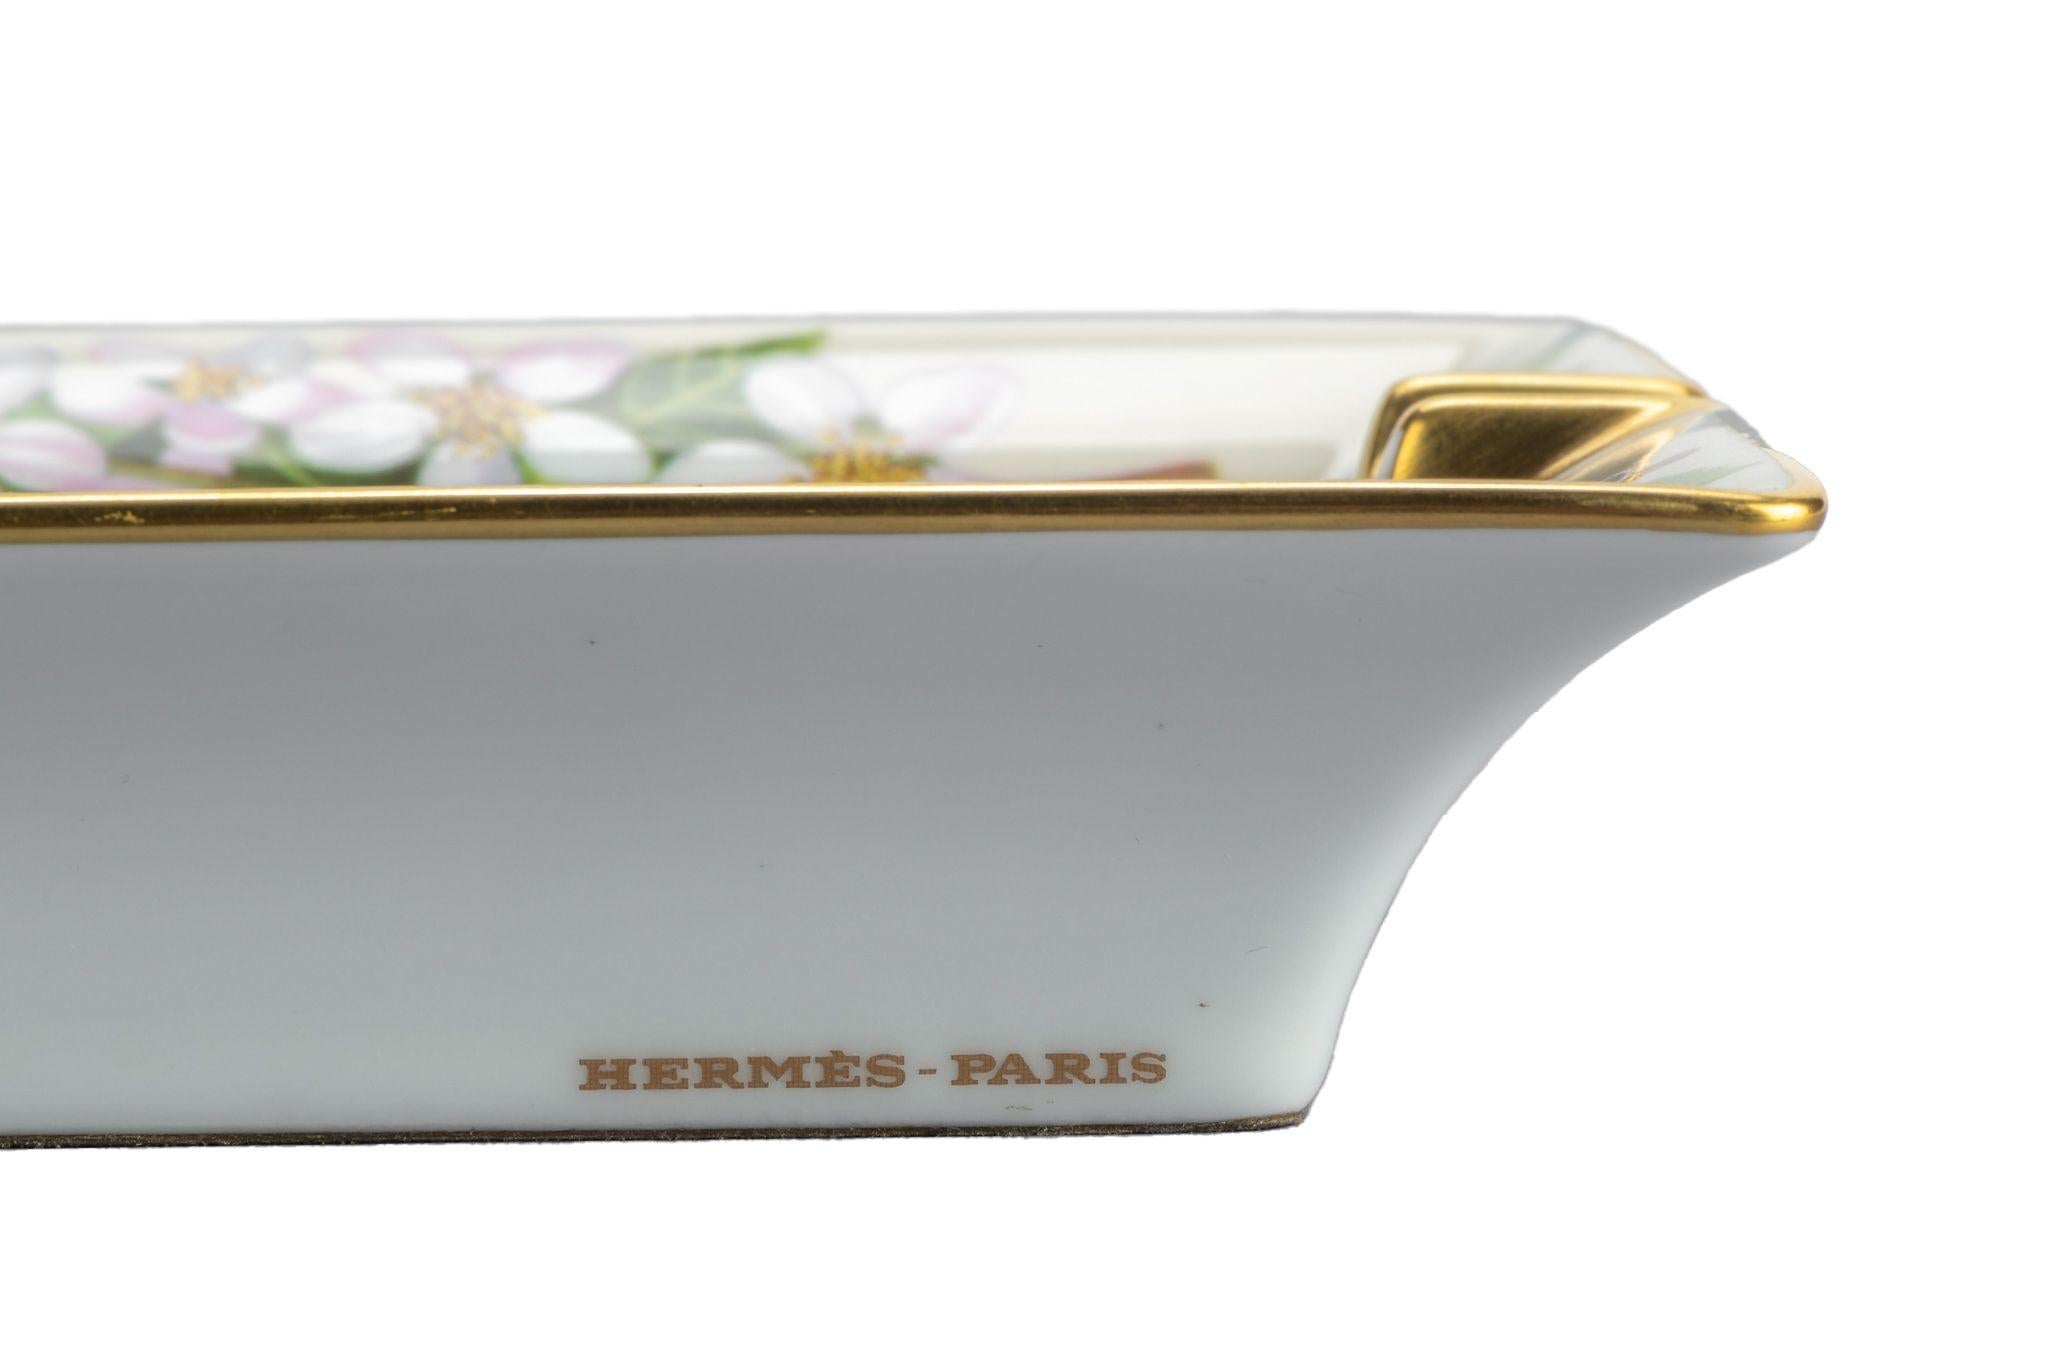 Hermes Apple White Porcelain Ashtray In Excellent Condition For Sale In West Hollywood, CA